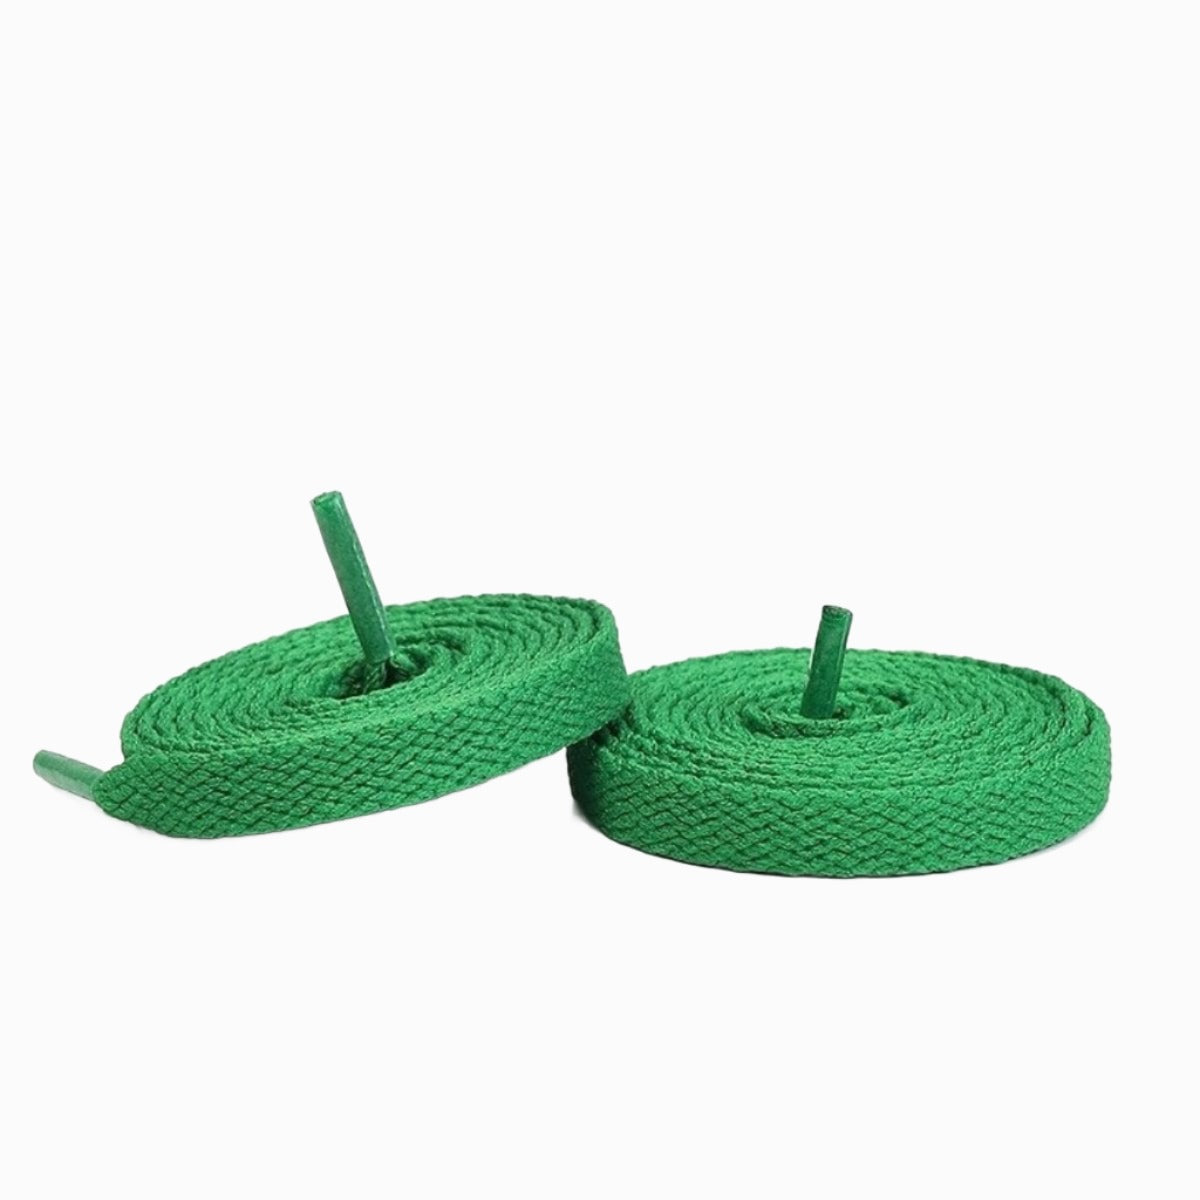 green-fun-shoelaces-suitable-for-tying shoelaces-on-popular-sneakers